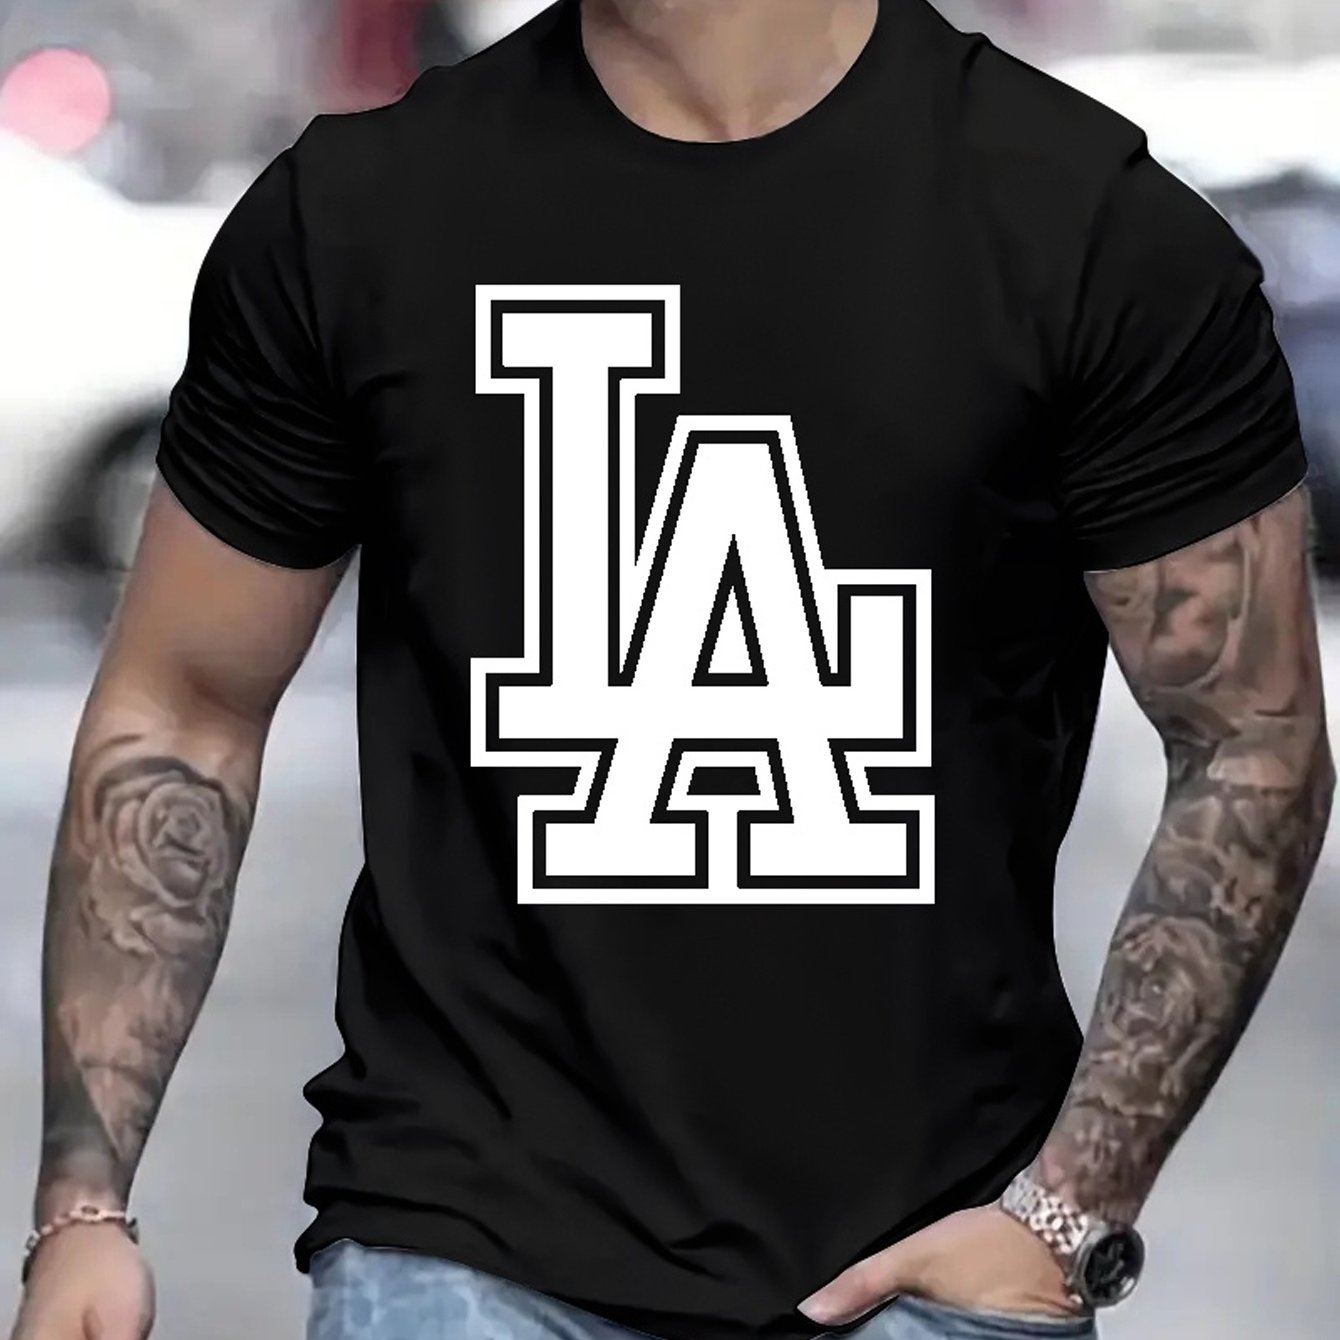 Dodgers jersey - Only AliExpress has such high quality